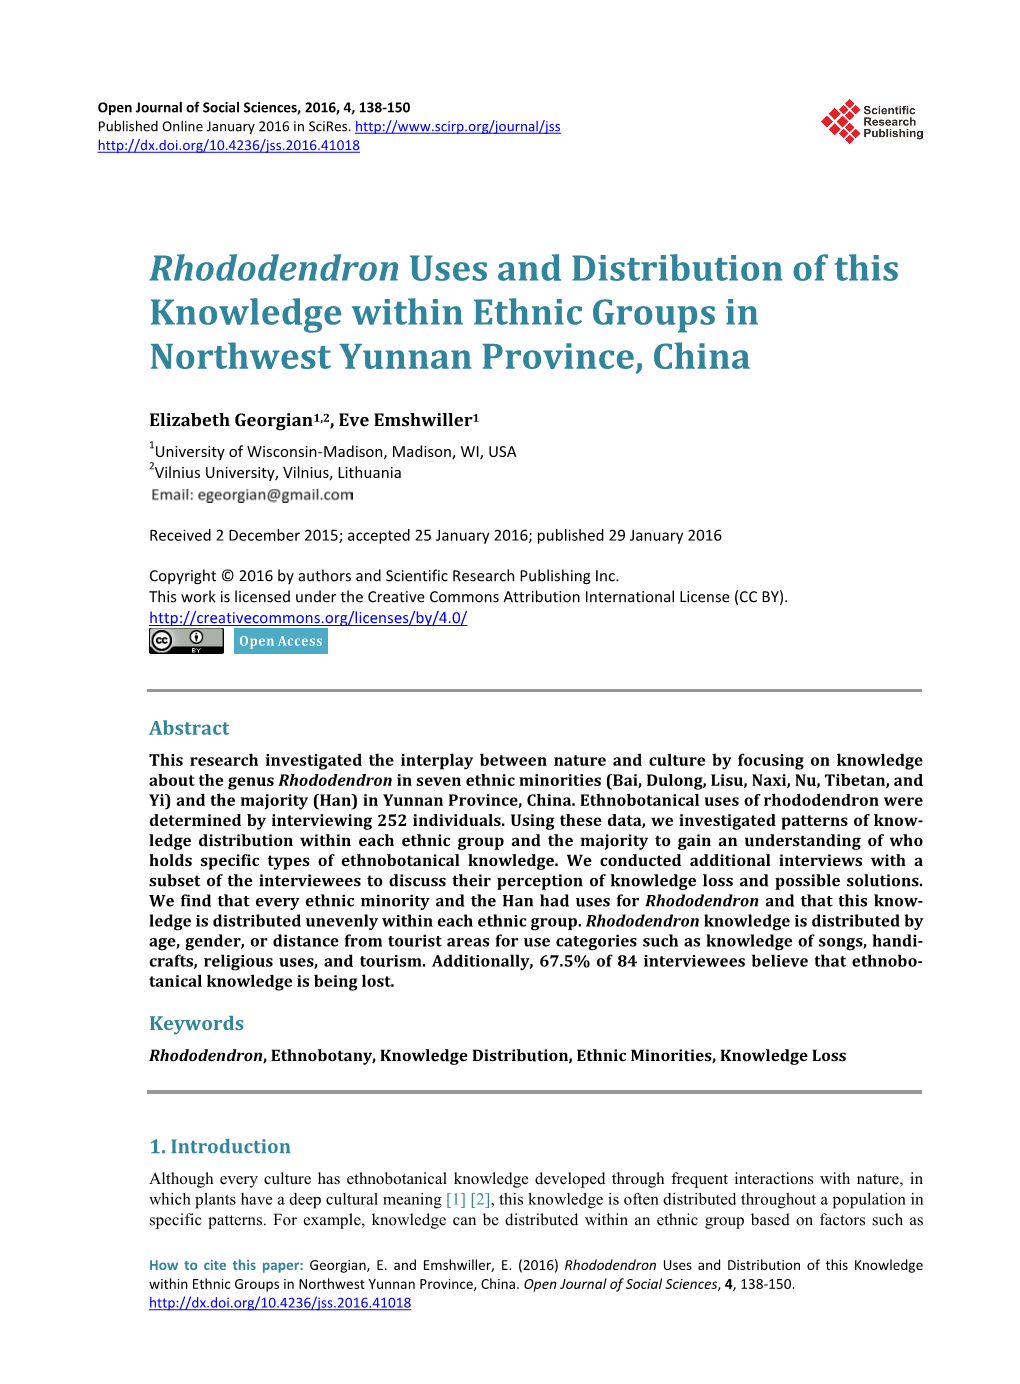 Rhododendron Uses and Distribution of This Knowledge Within Ethnic Groups in Northwest Yunnan Province, China